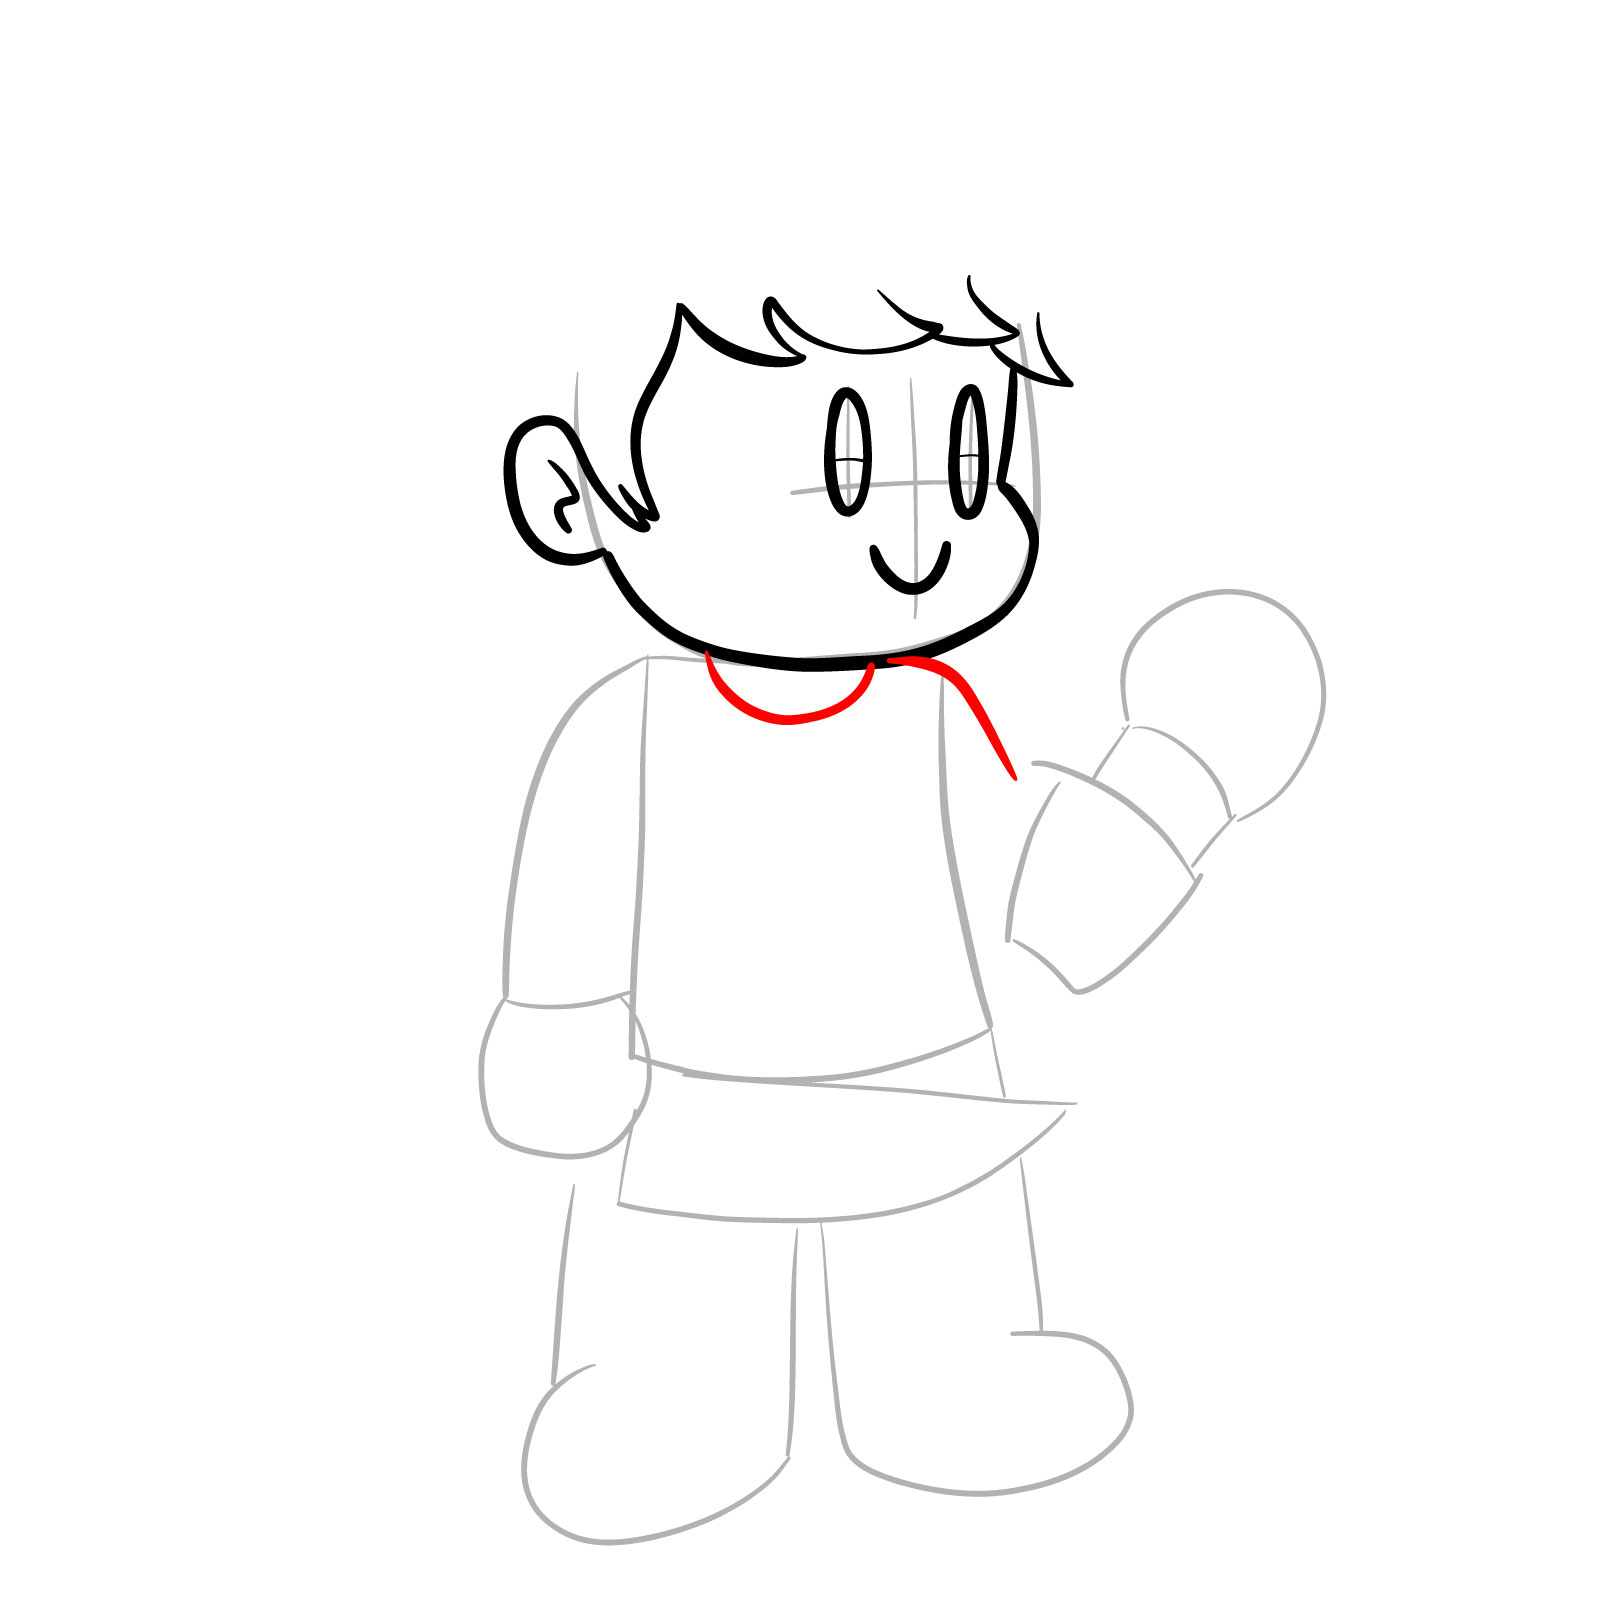 How to draw Chara from FNF - step 11